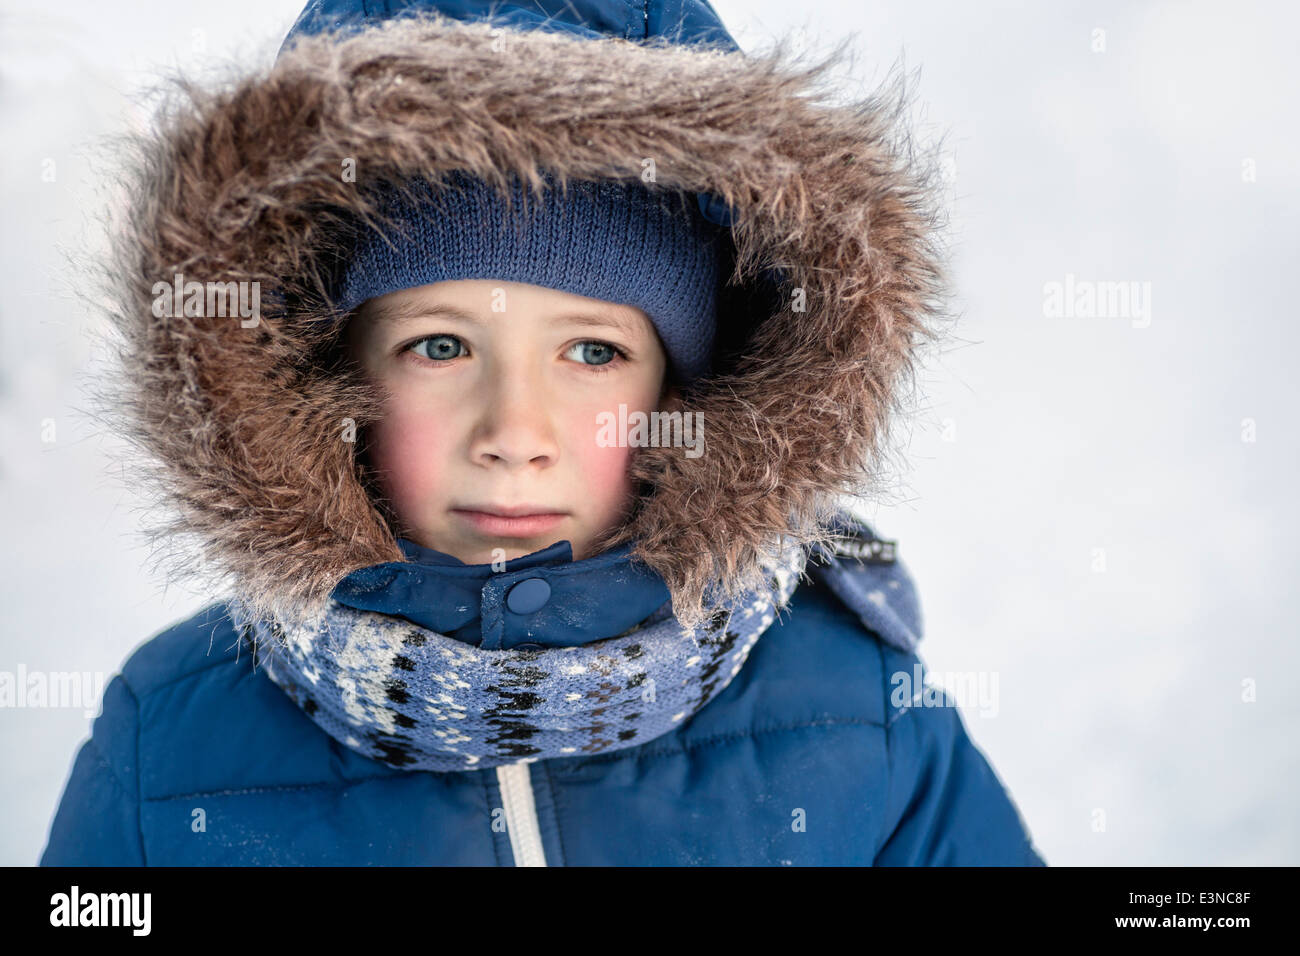 Thoughtful boy in warm clothing looking away outdoors Stock Photo